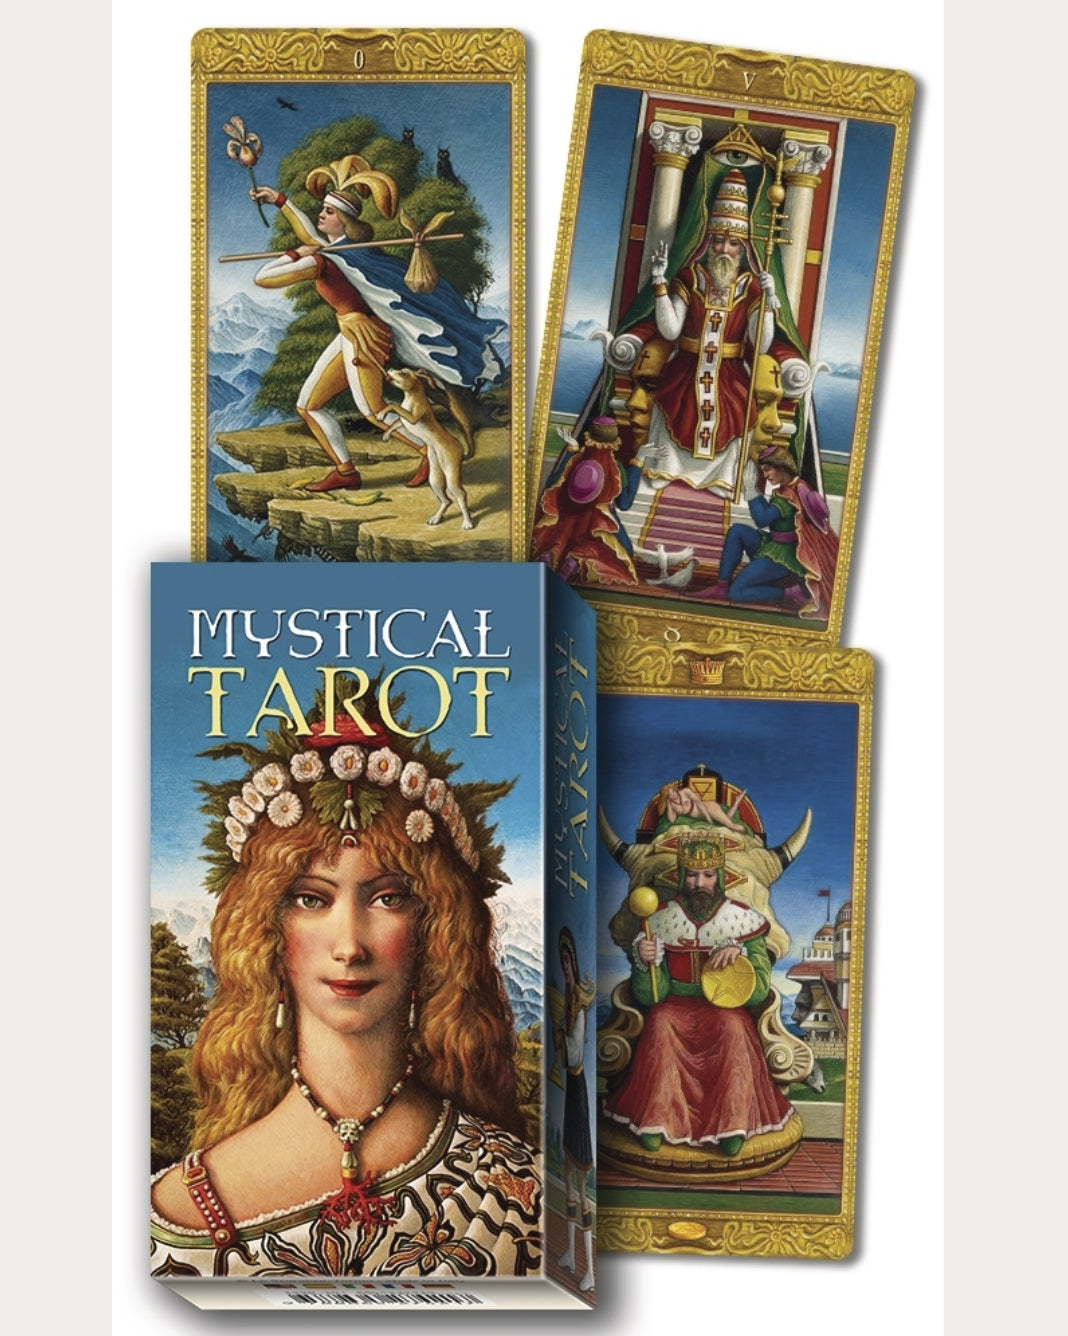 3989 - Spanish Tarot Deck - Museum of Witchcraft and Magic